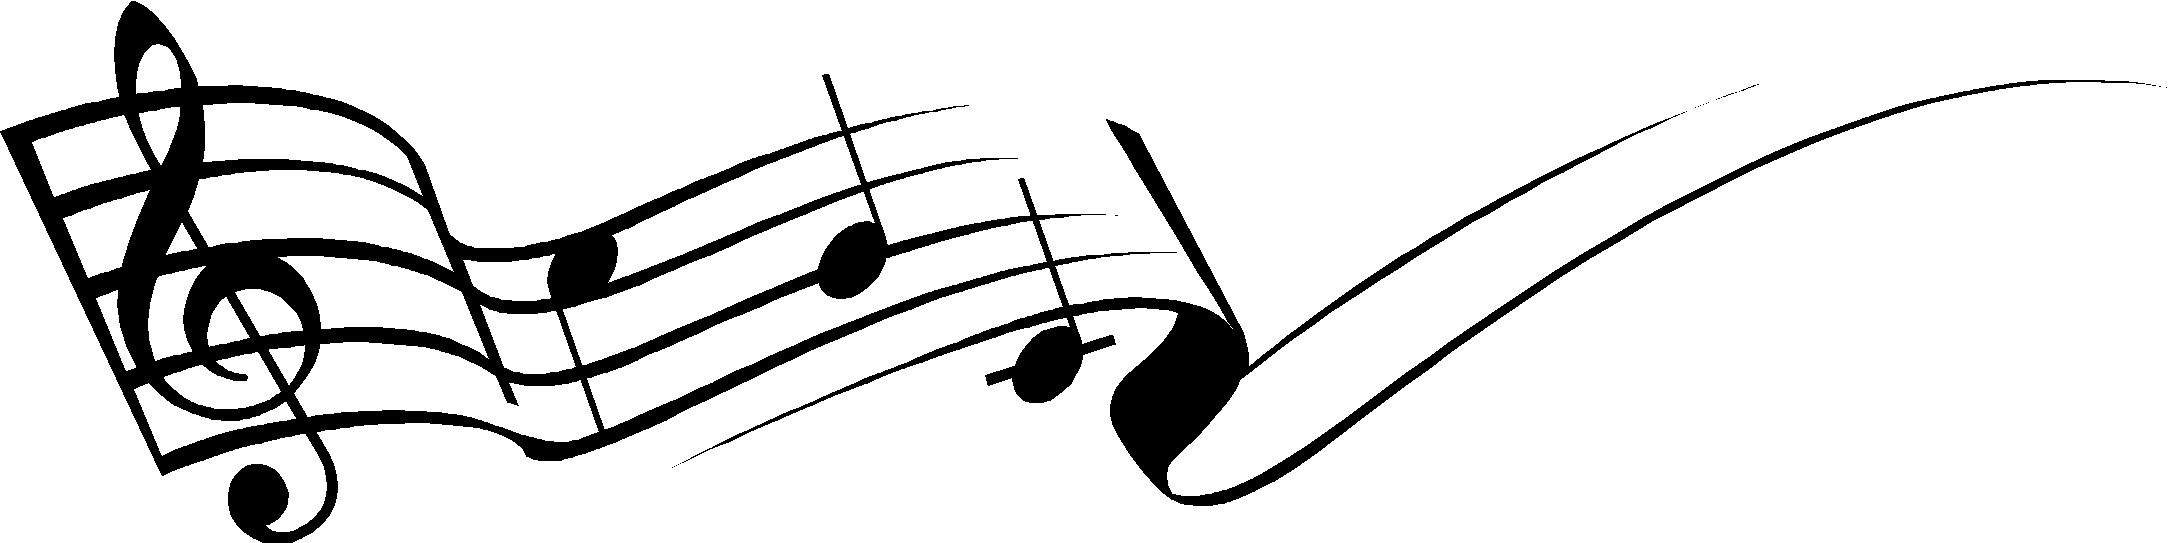 Images For > Music Note Page Border